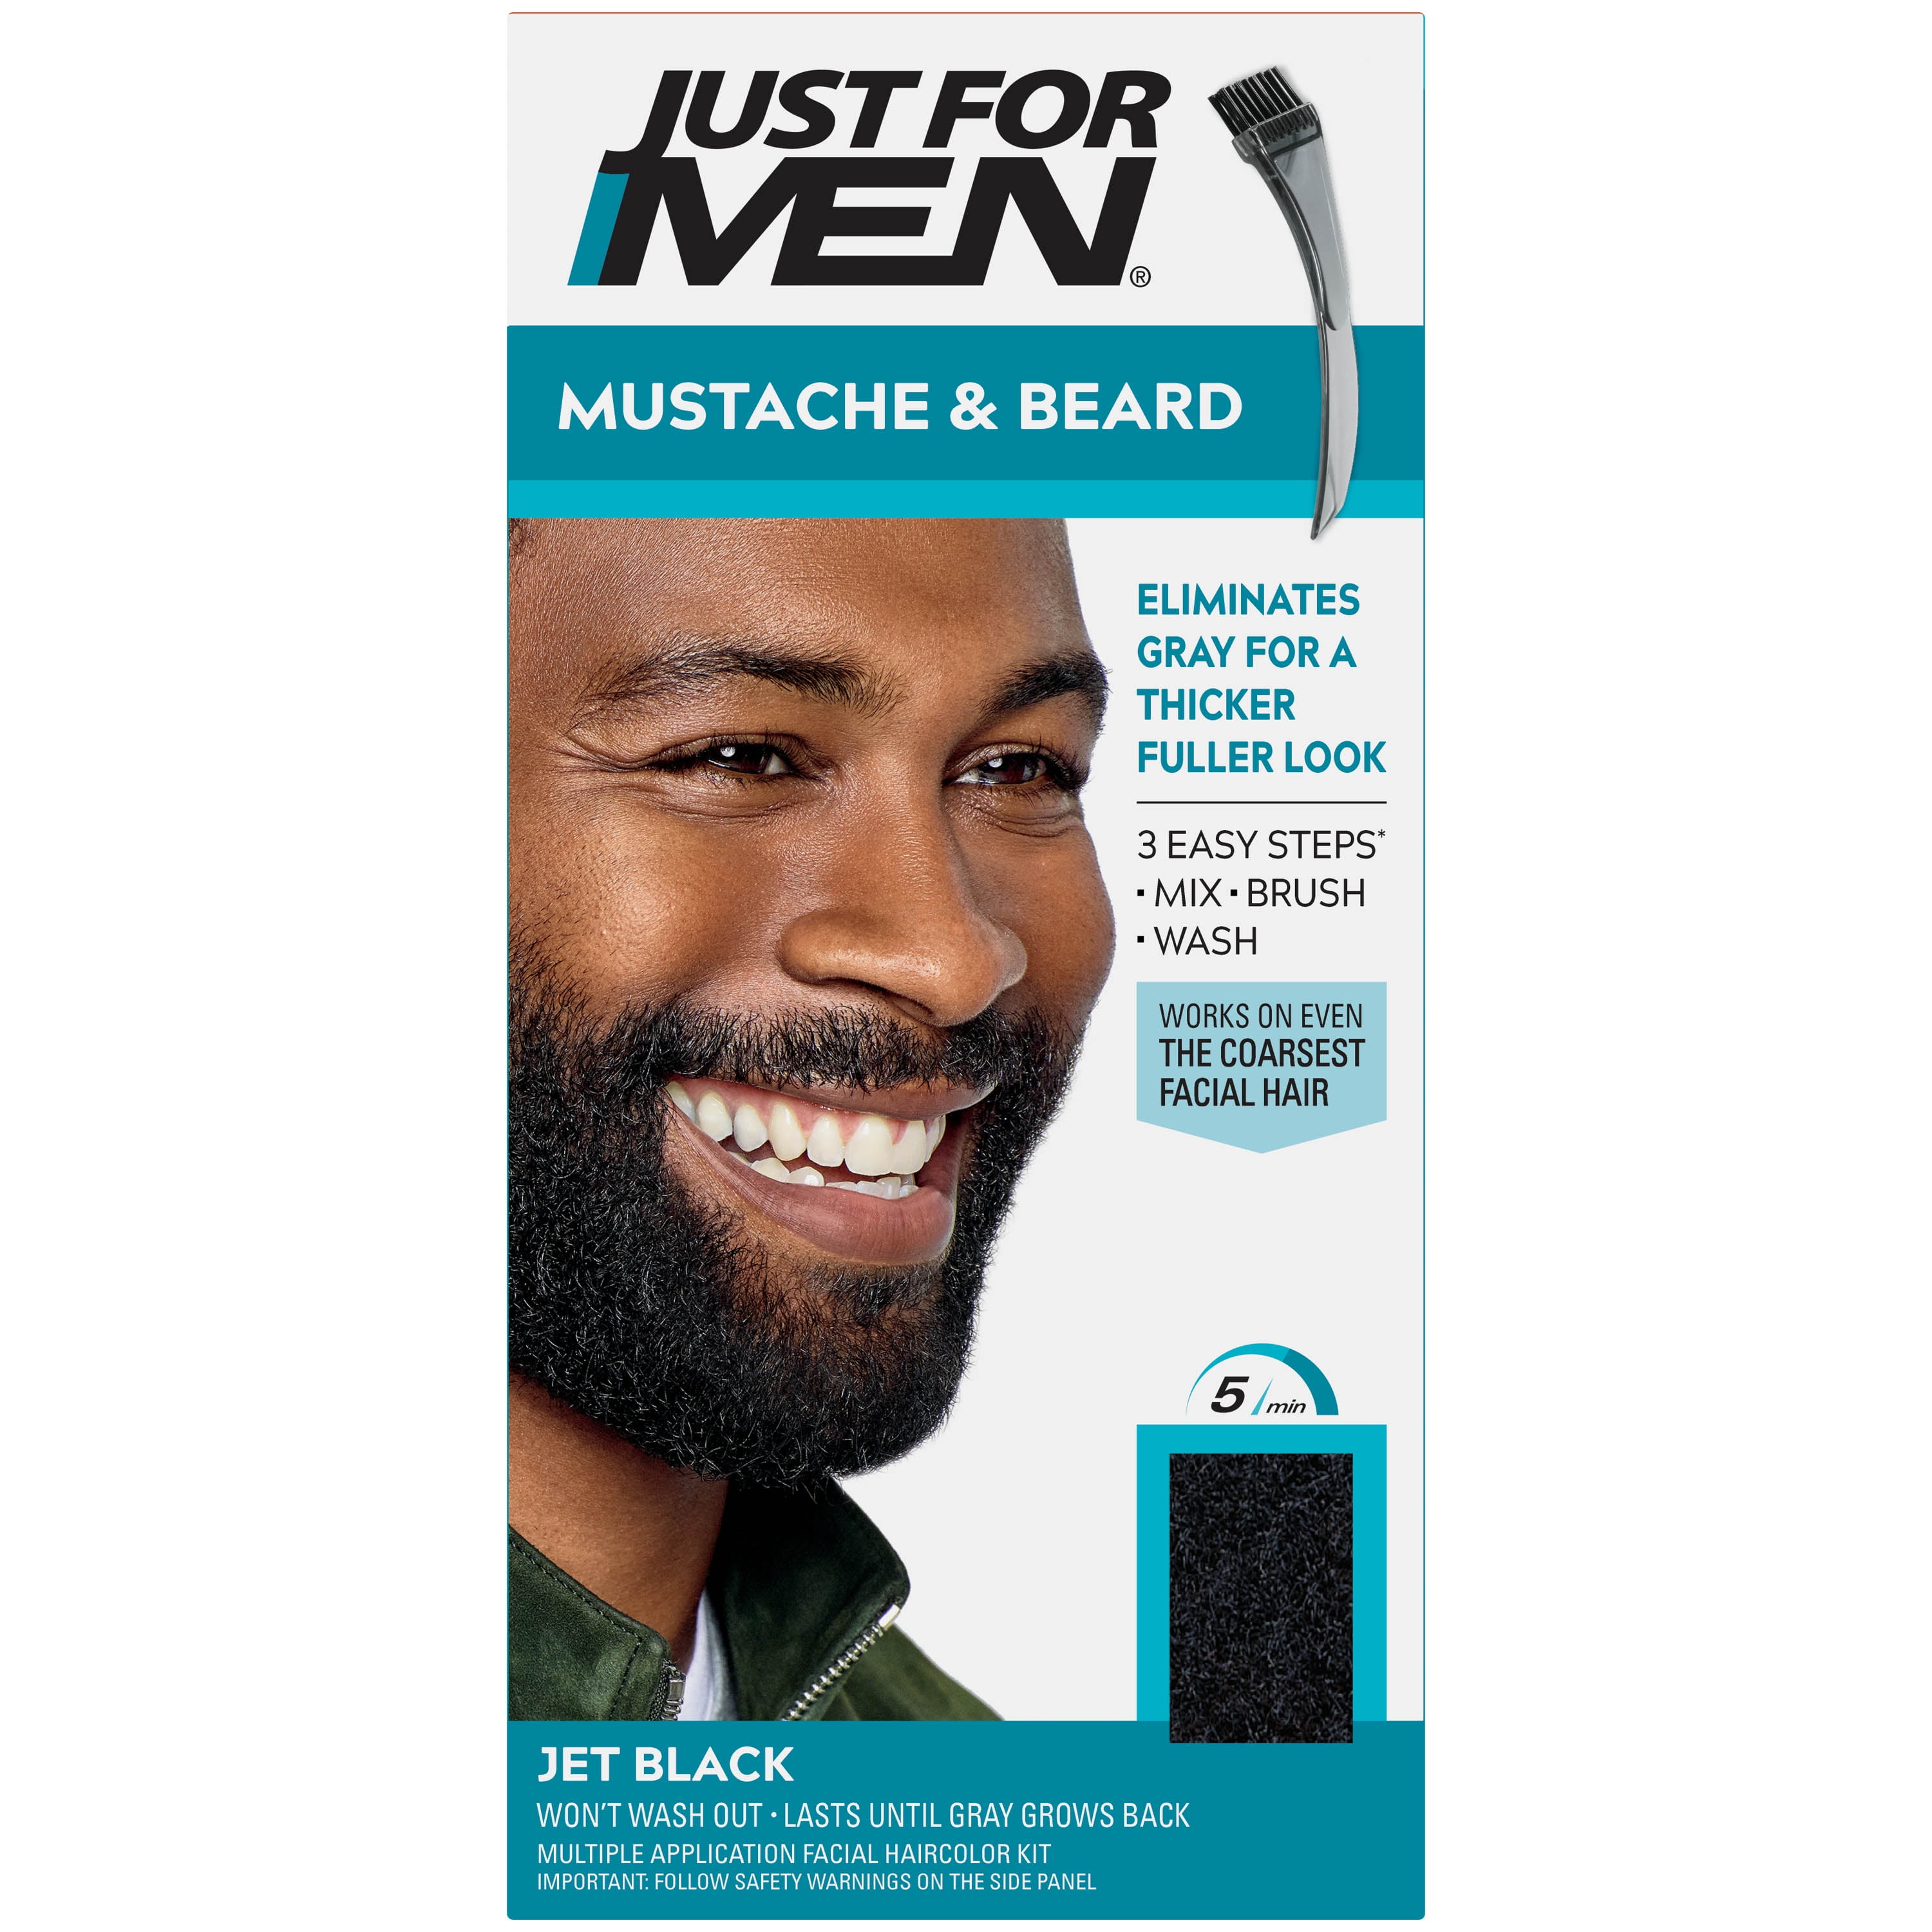 Just For Men Mustache and Beard Coloring for Gray Hair, M-27 Light Red Brown